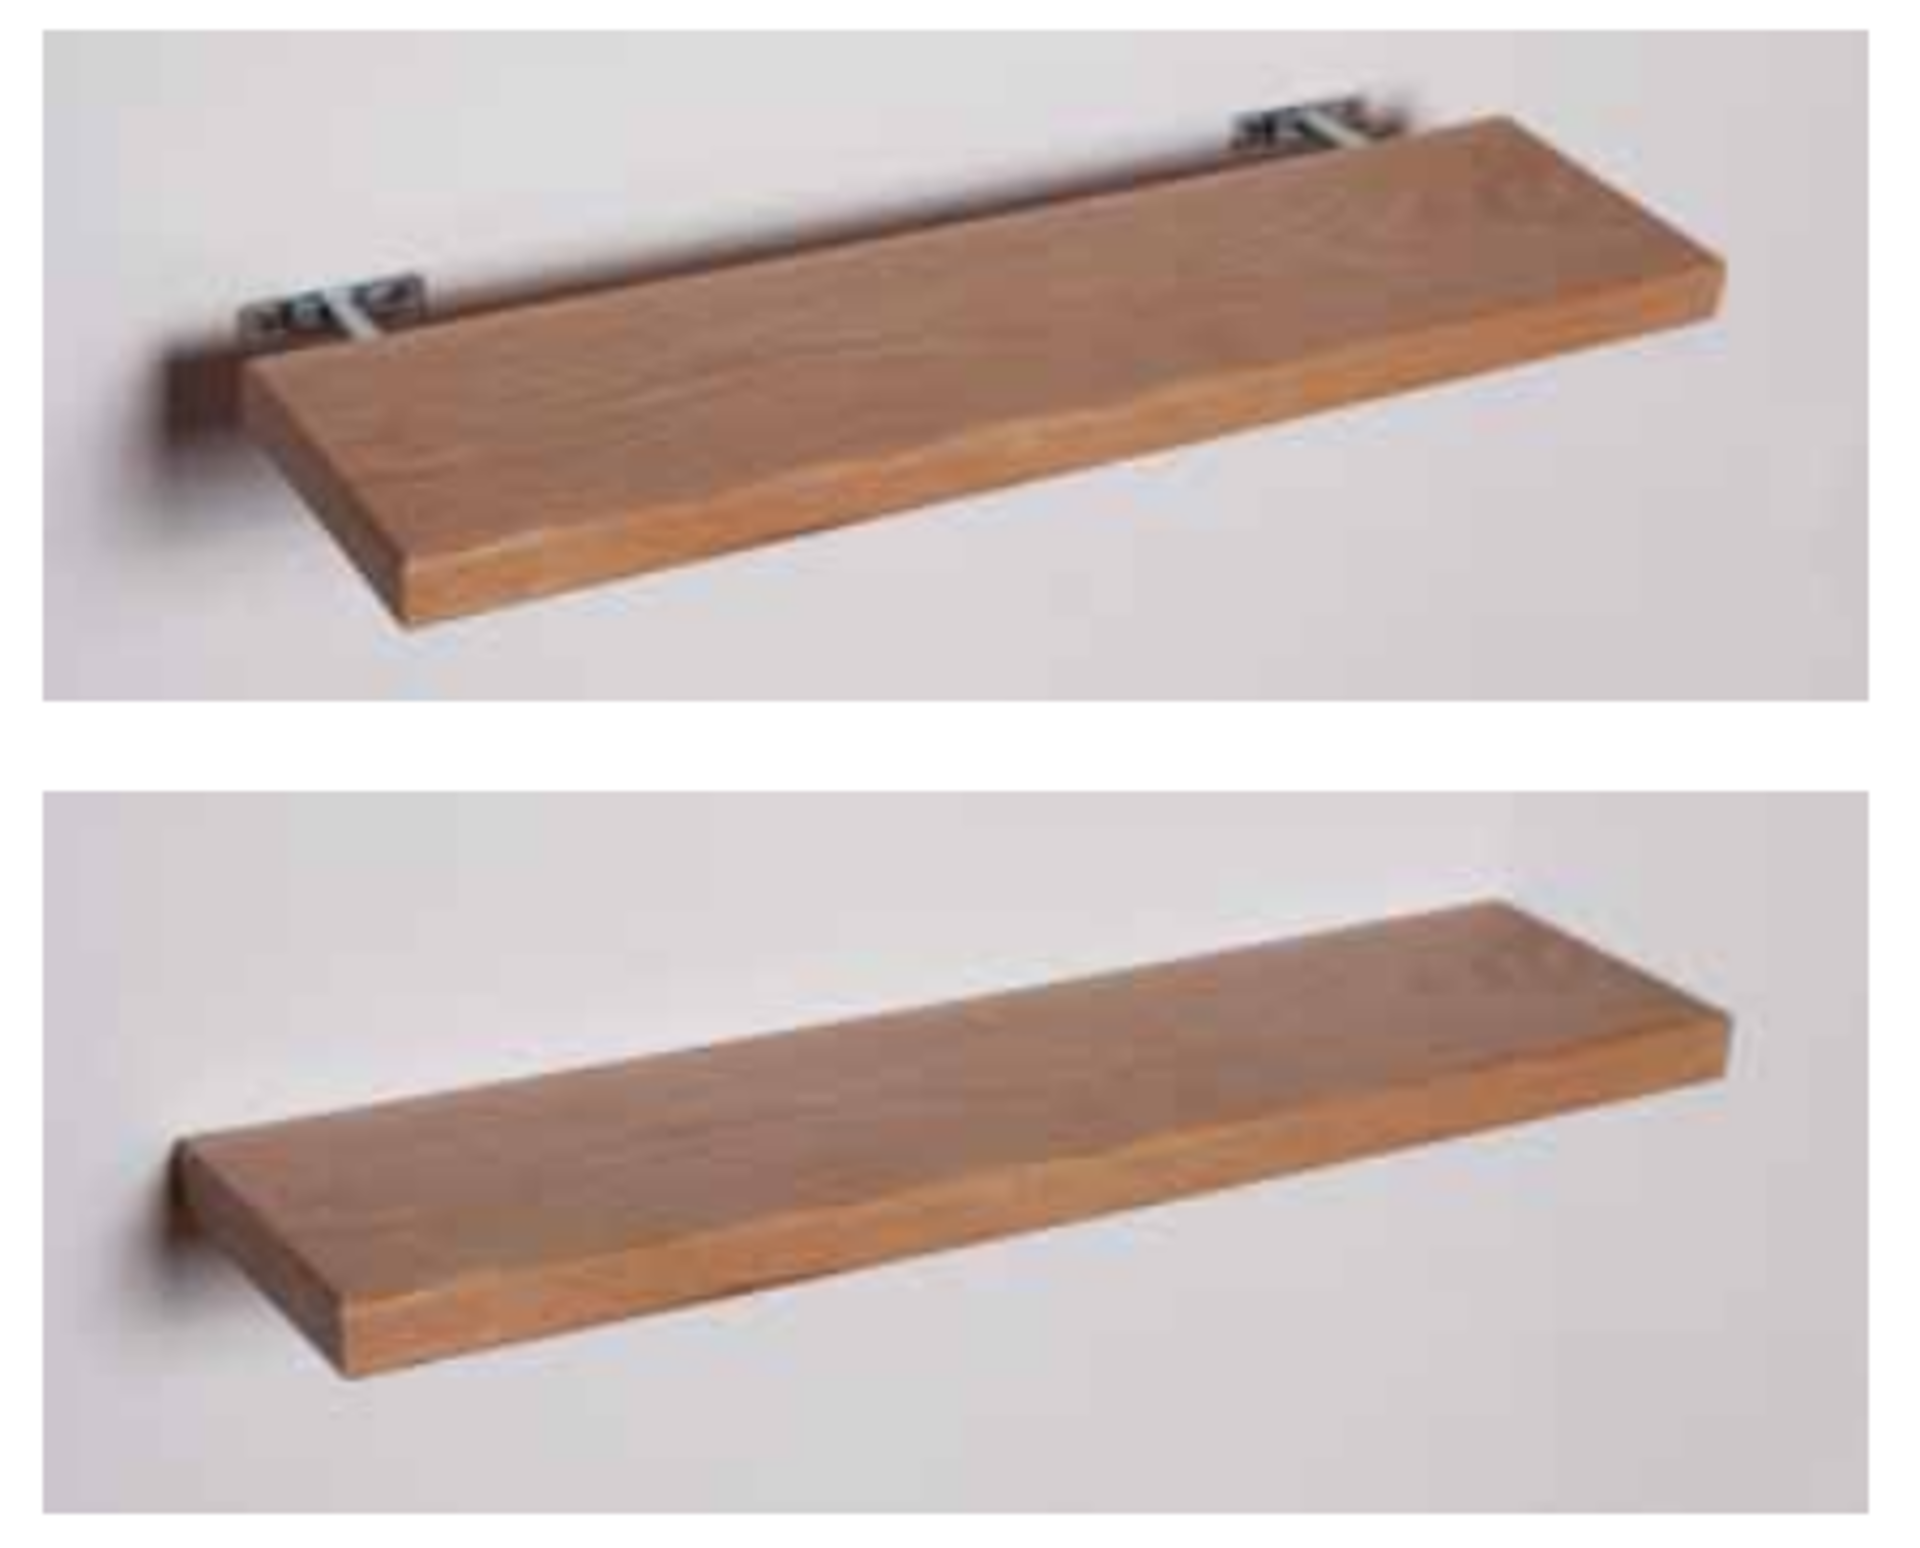 1 x Stonearth Cloakroom Bathroom Storage Shelf With Concealed Brackets - American Solid WALNUT - Image 2 of 12